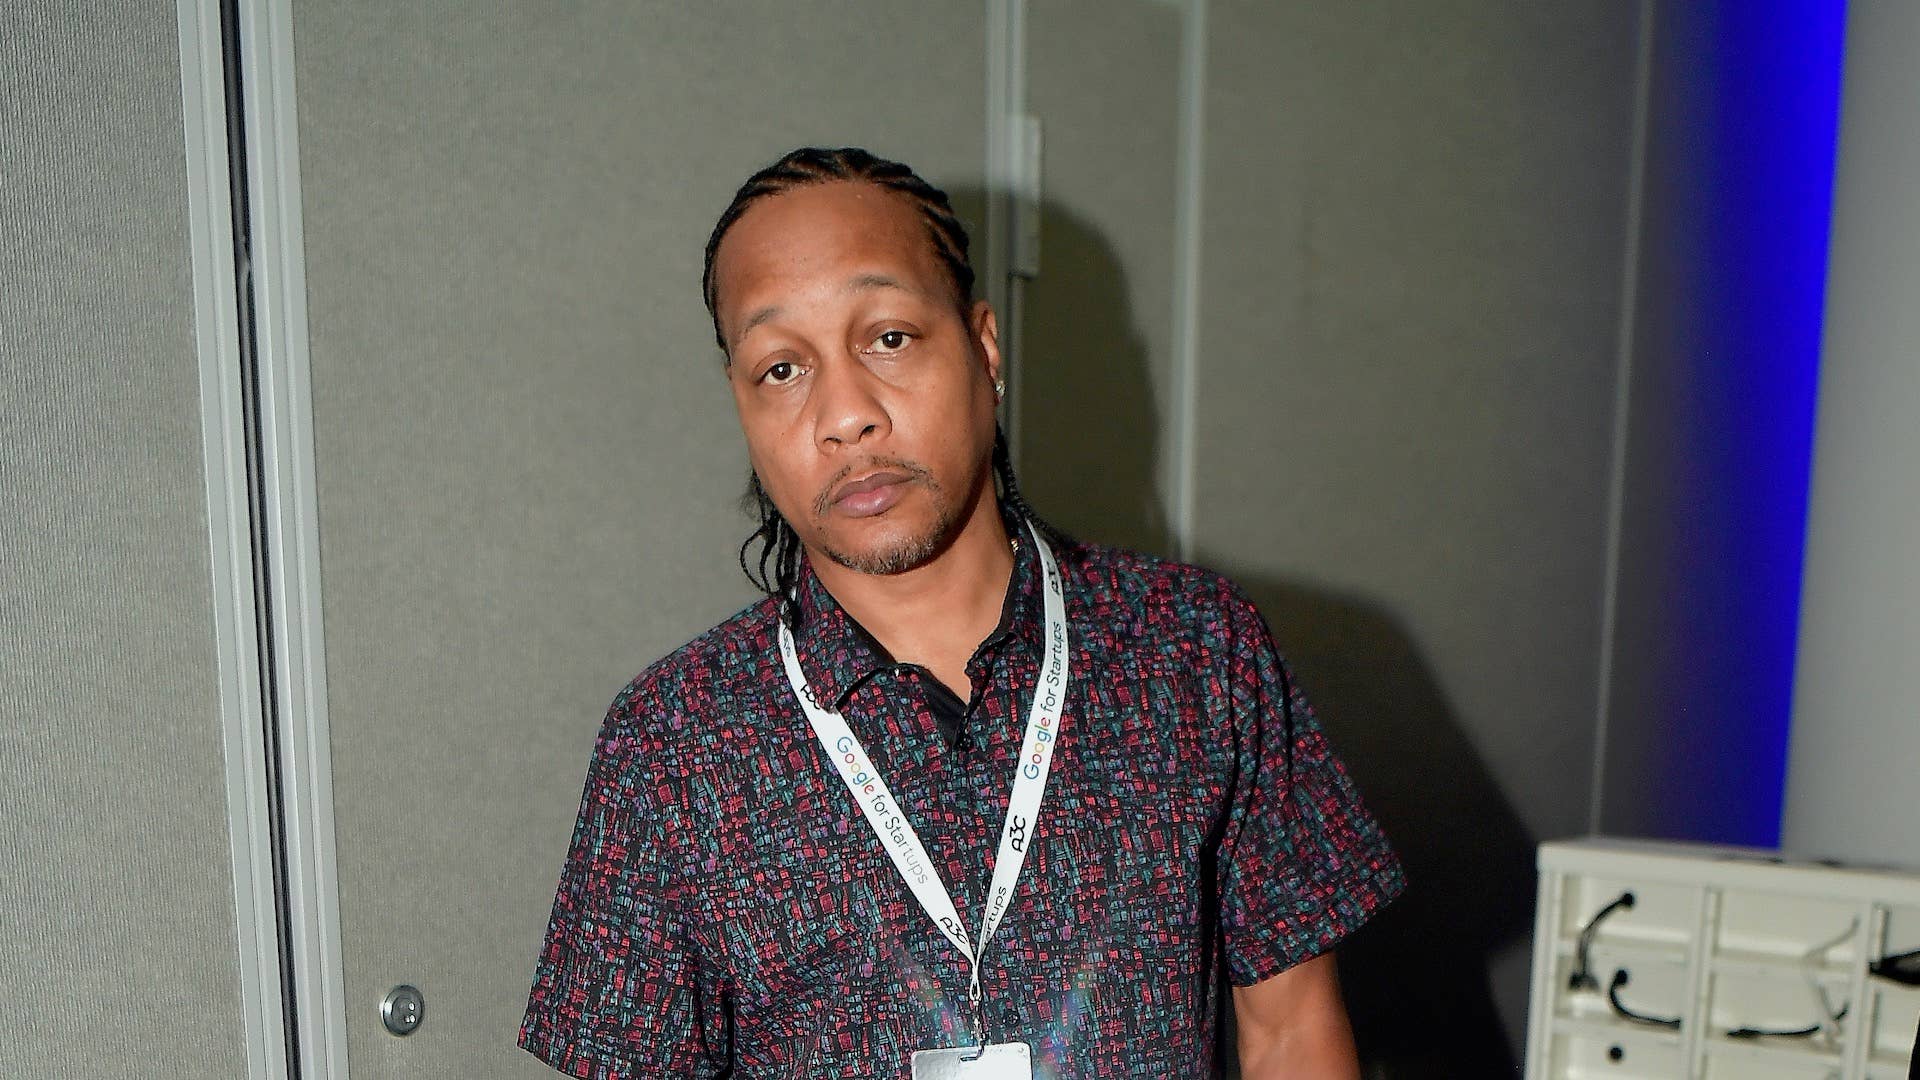 DJ Quik attends 2019 A3C Festival & Conference at Atlanta convention Center